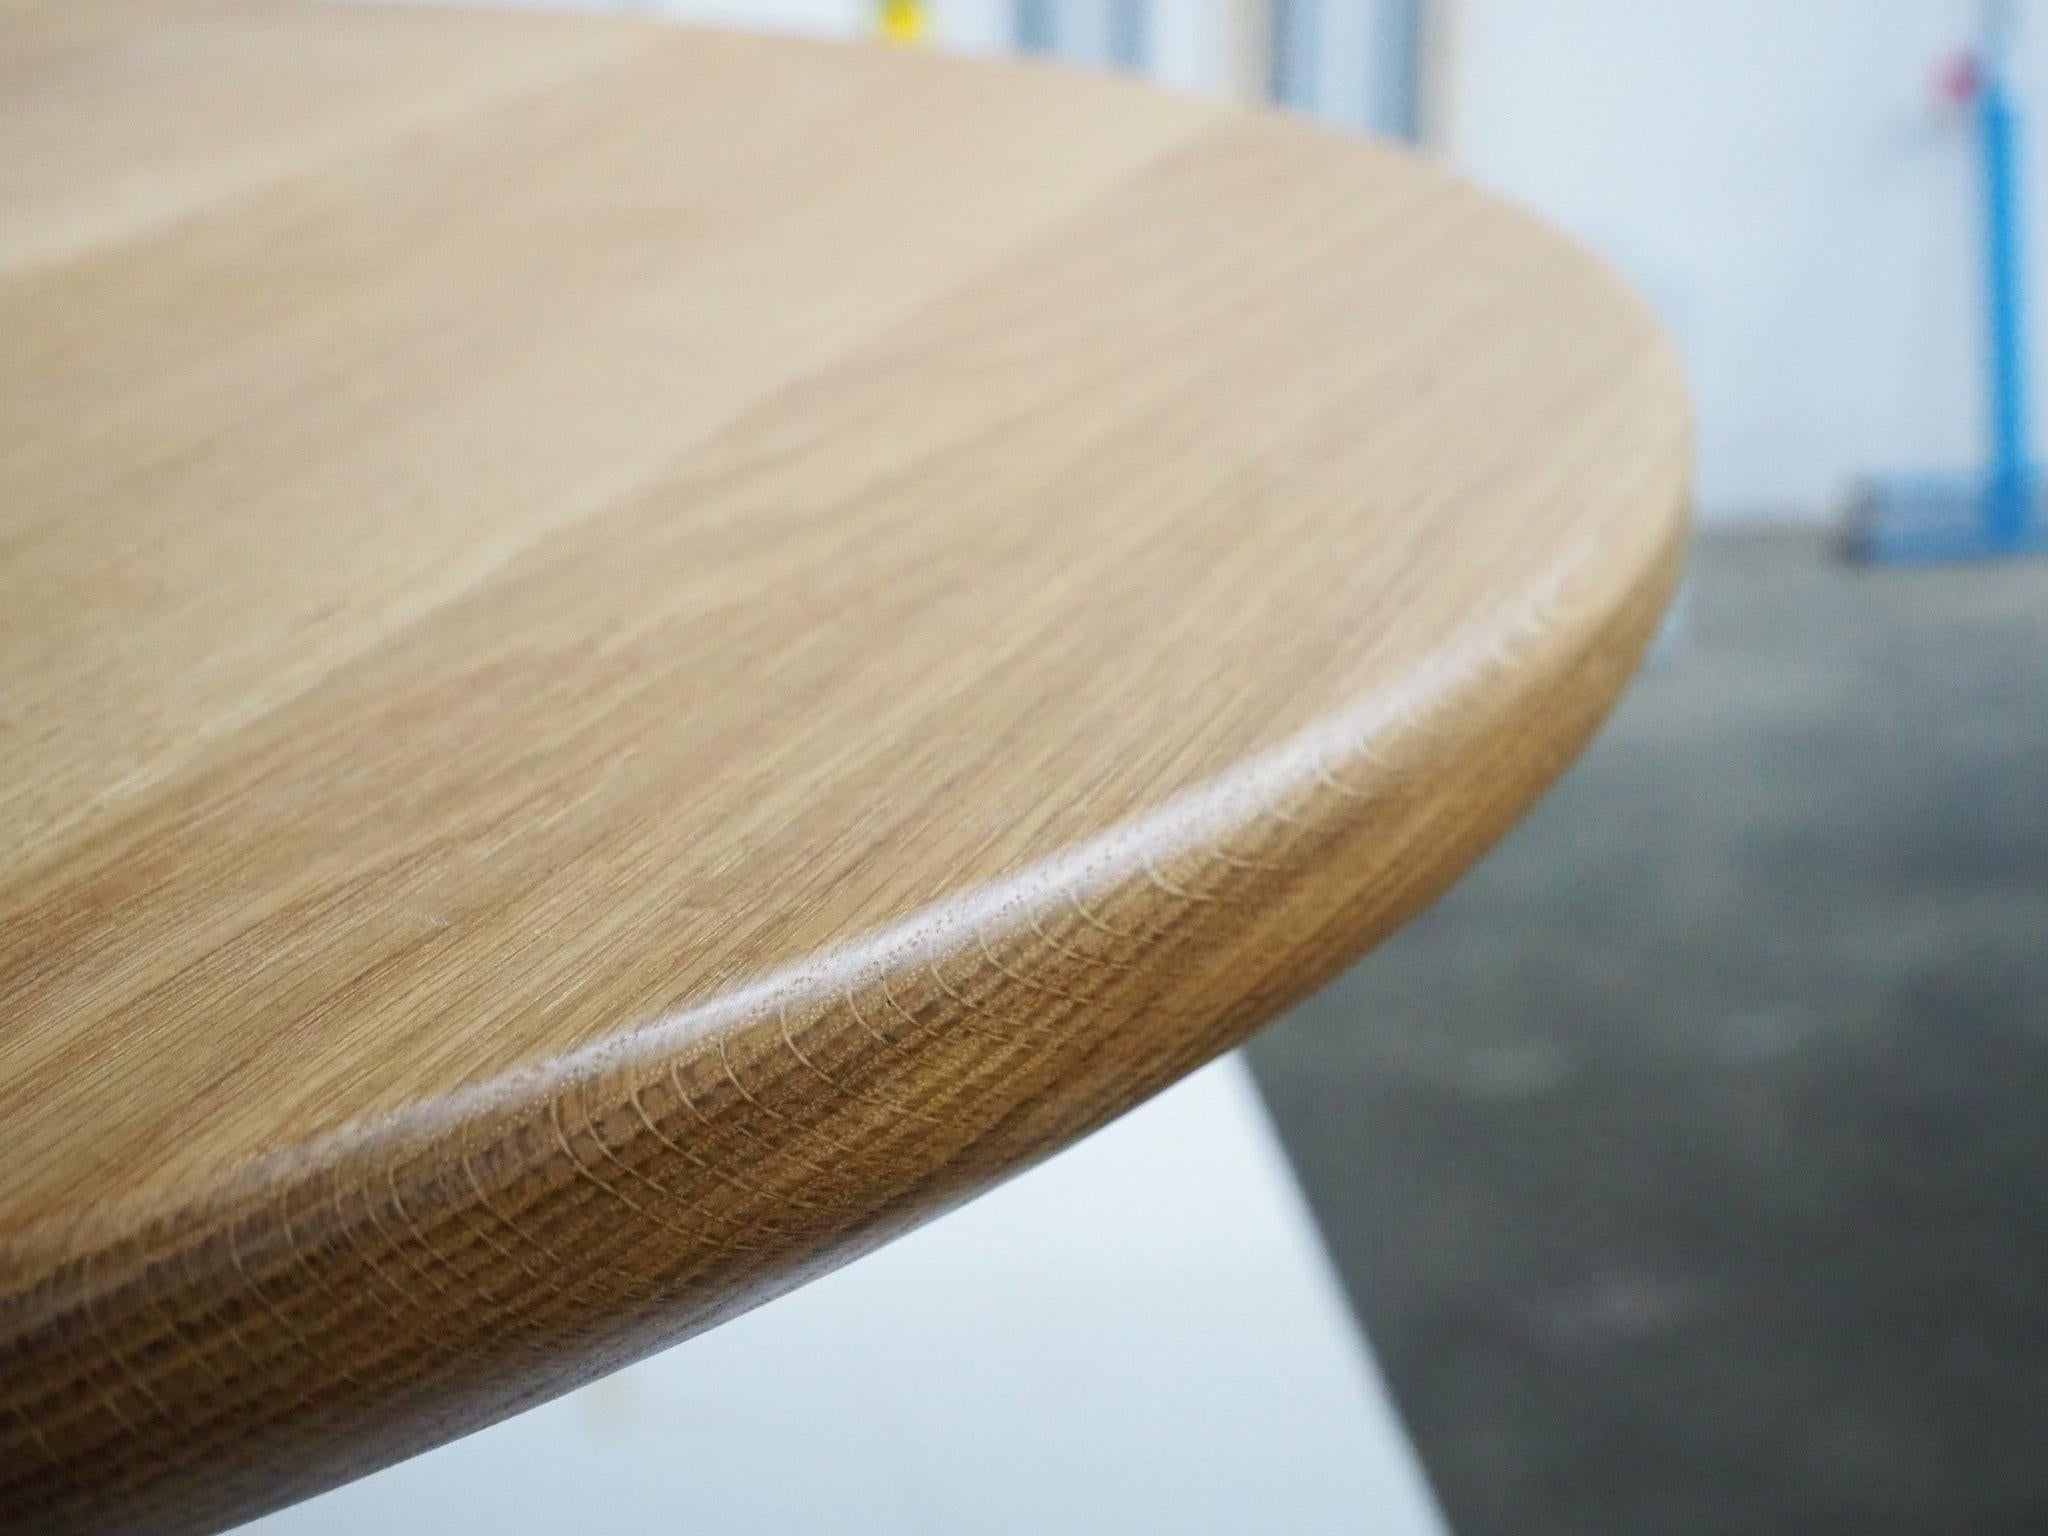 When we designed the Lutra table, we wanted to make a table that's fun but also sophisticated while still being of a more minimalist design. We believe we achieved that in this piece. 

It features a circular top with a lovely round over on the